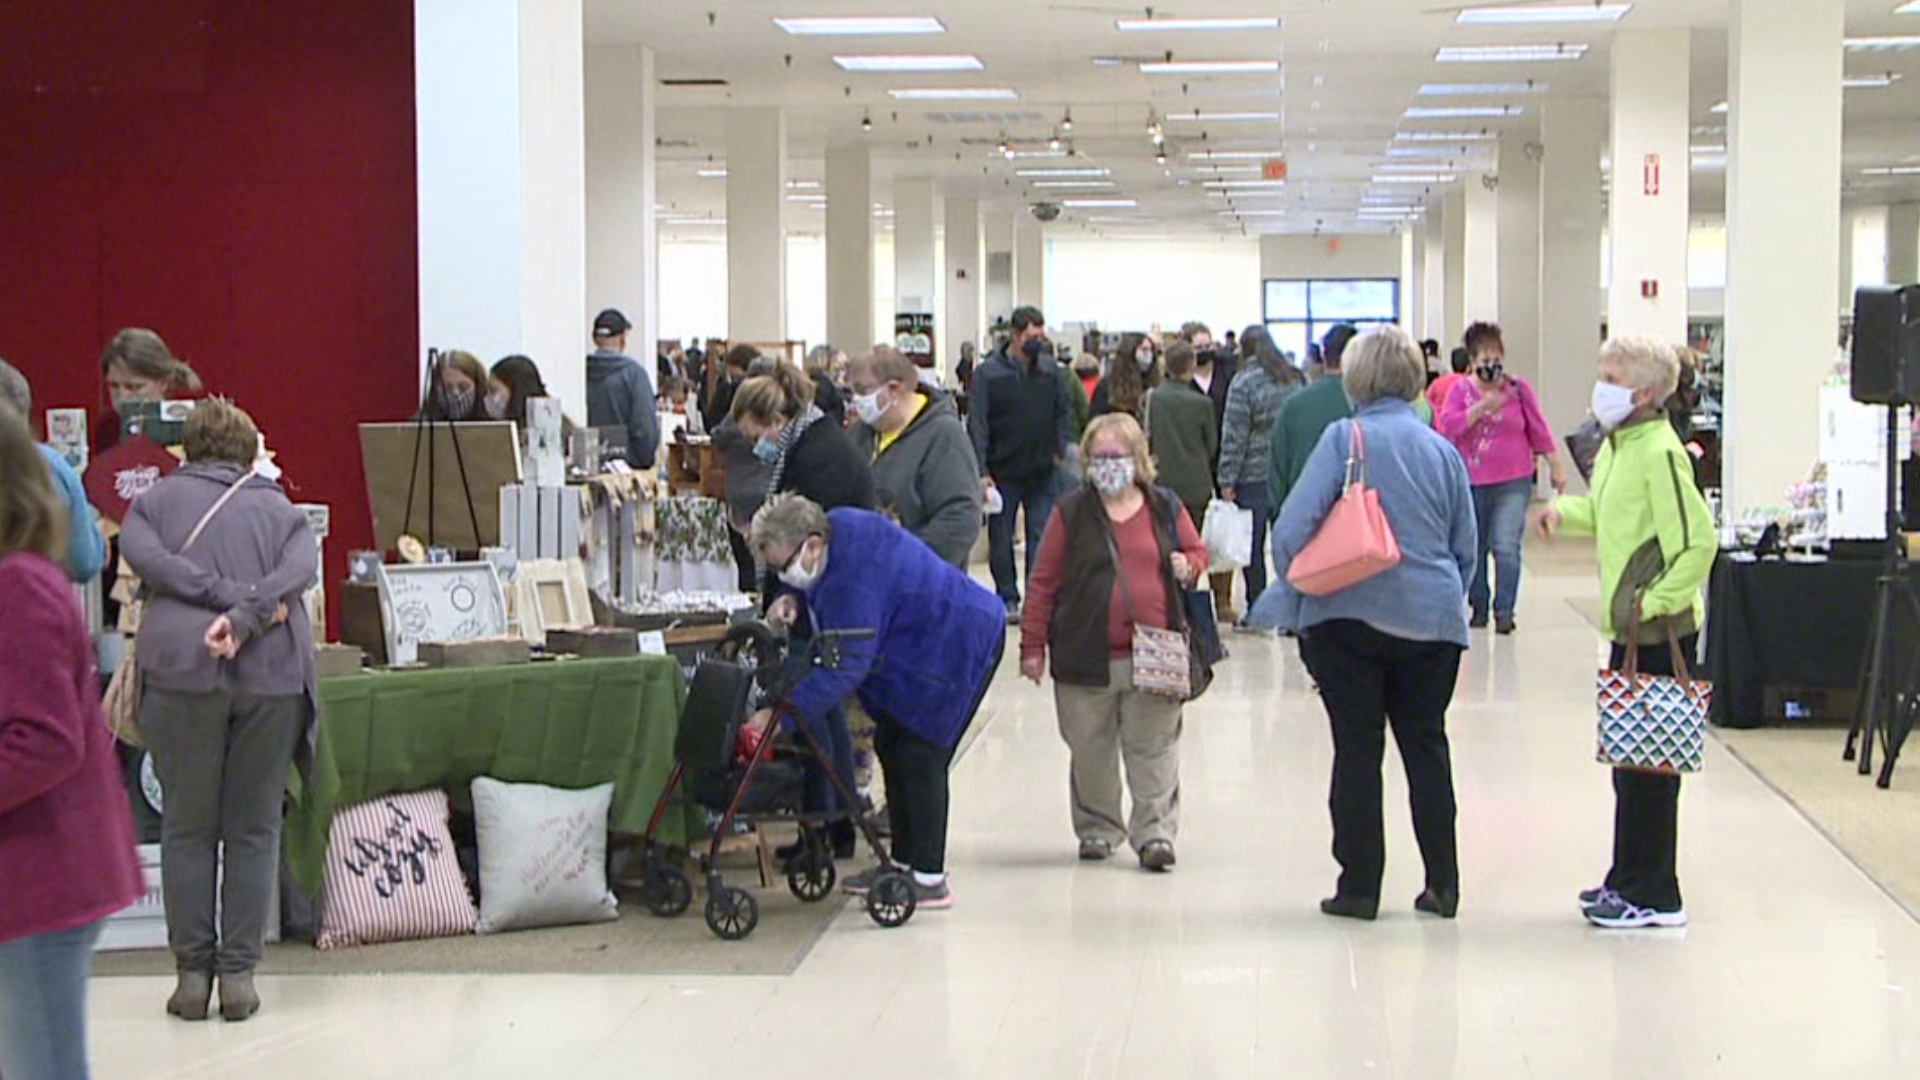 The empty Sears in the Wyoming Valley Mall was filled with shoppers once again.